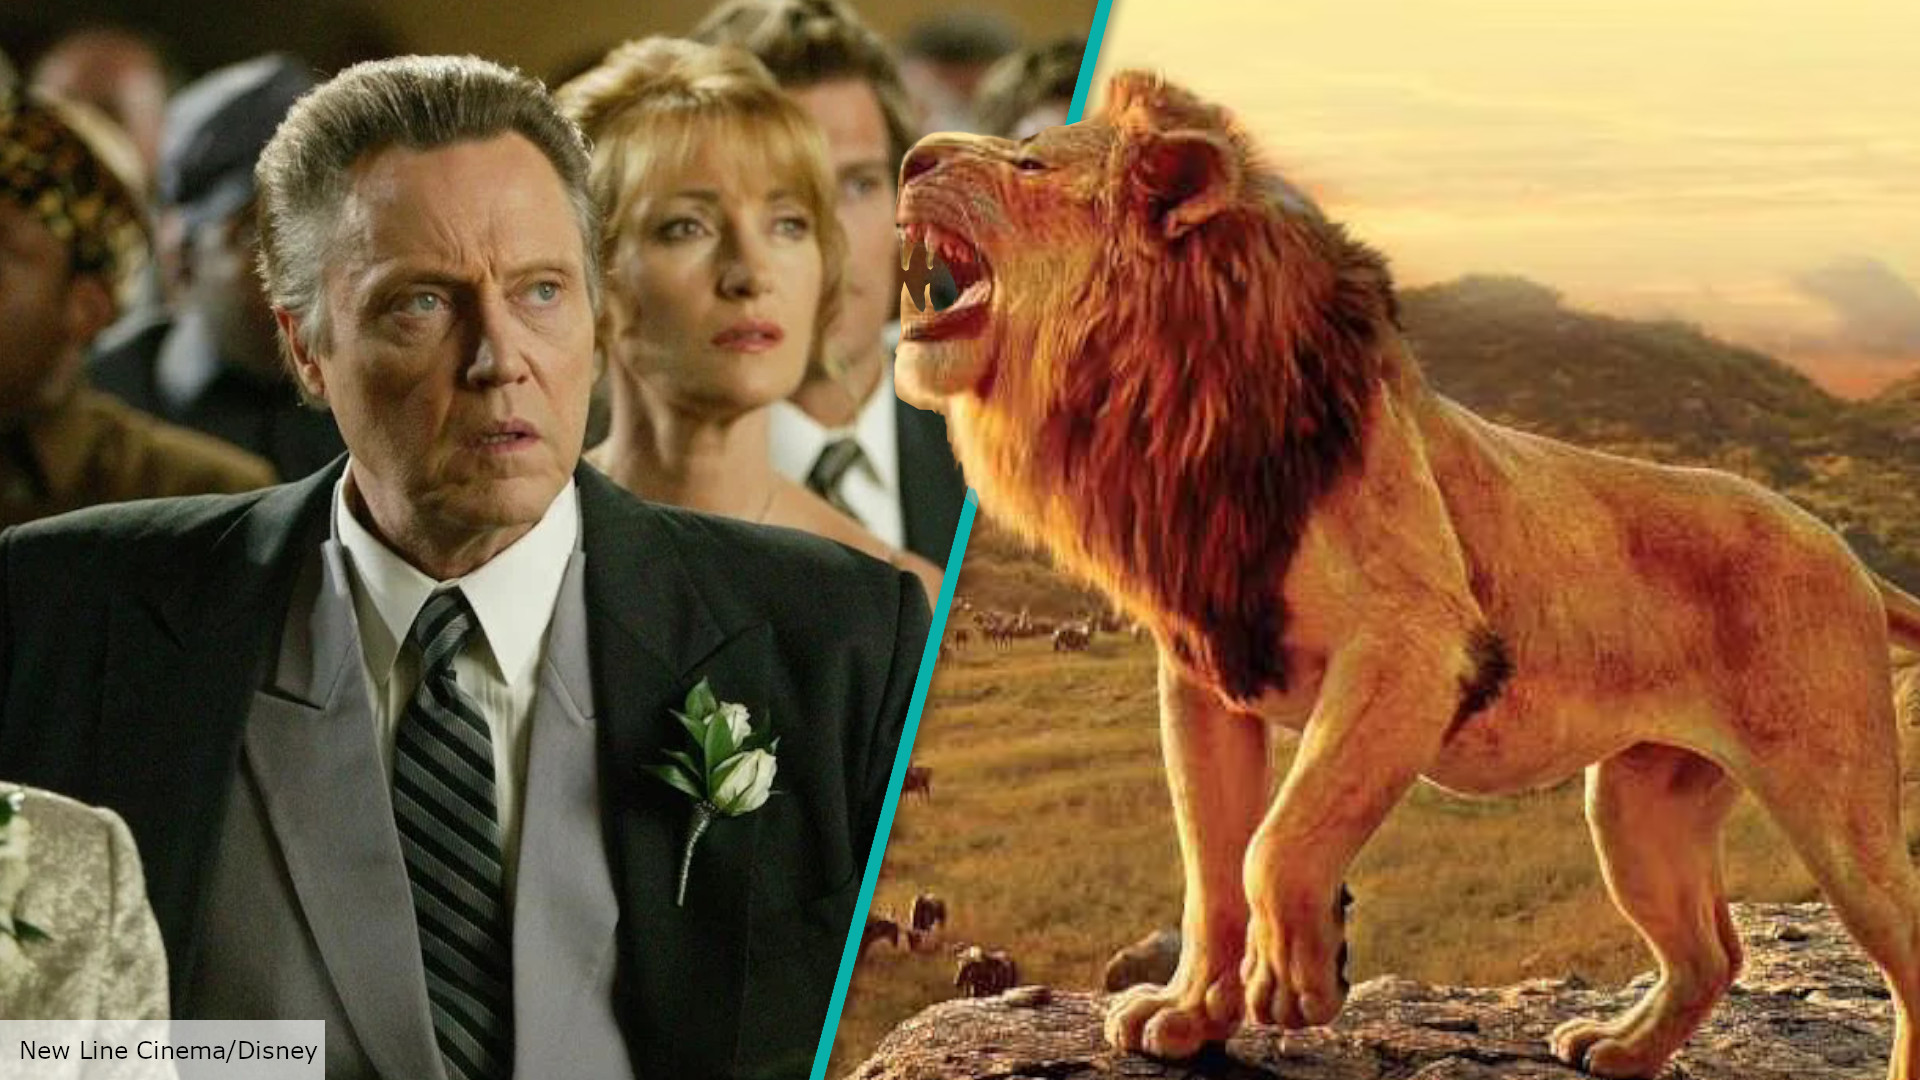 Christopher Walken used to be a lion tamer, yes, really | The Digital Fix